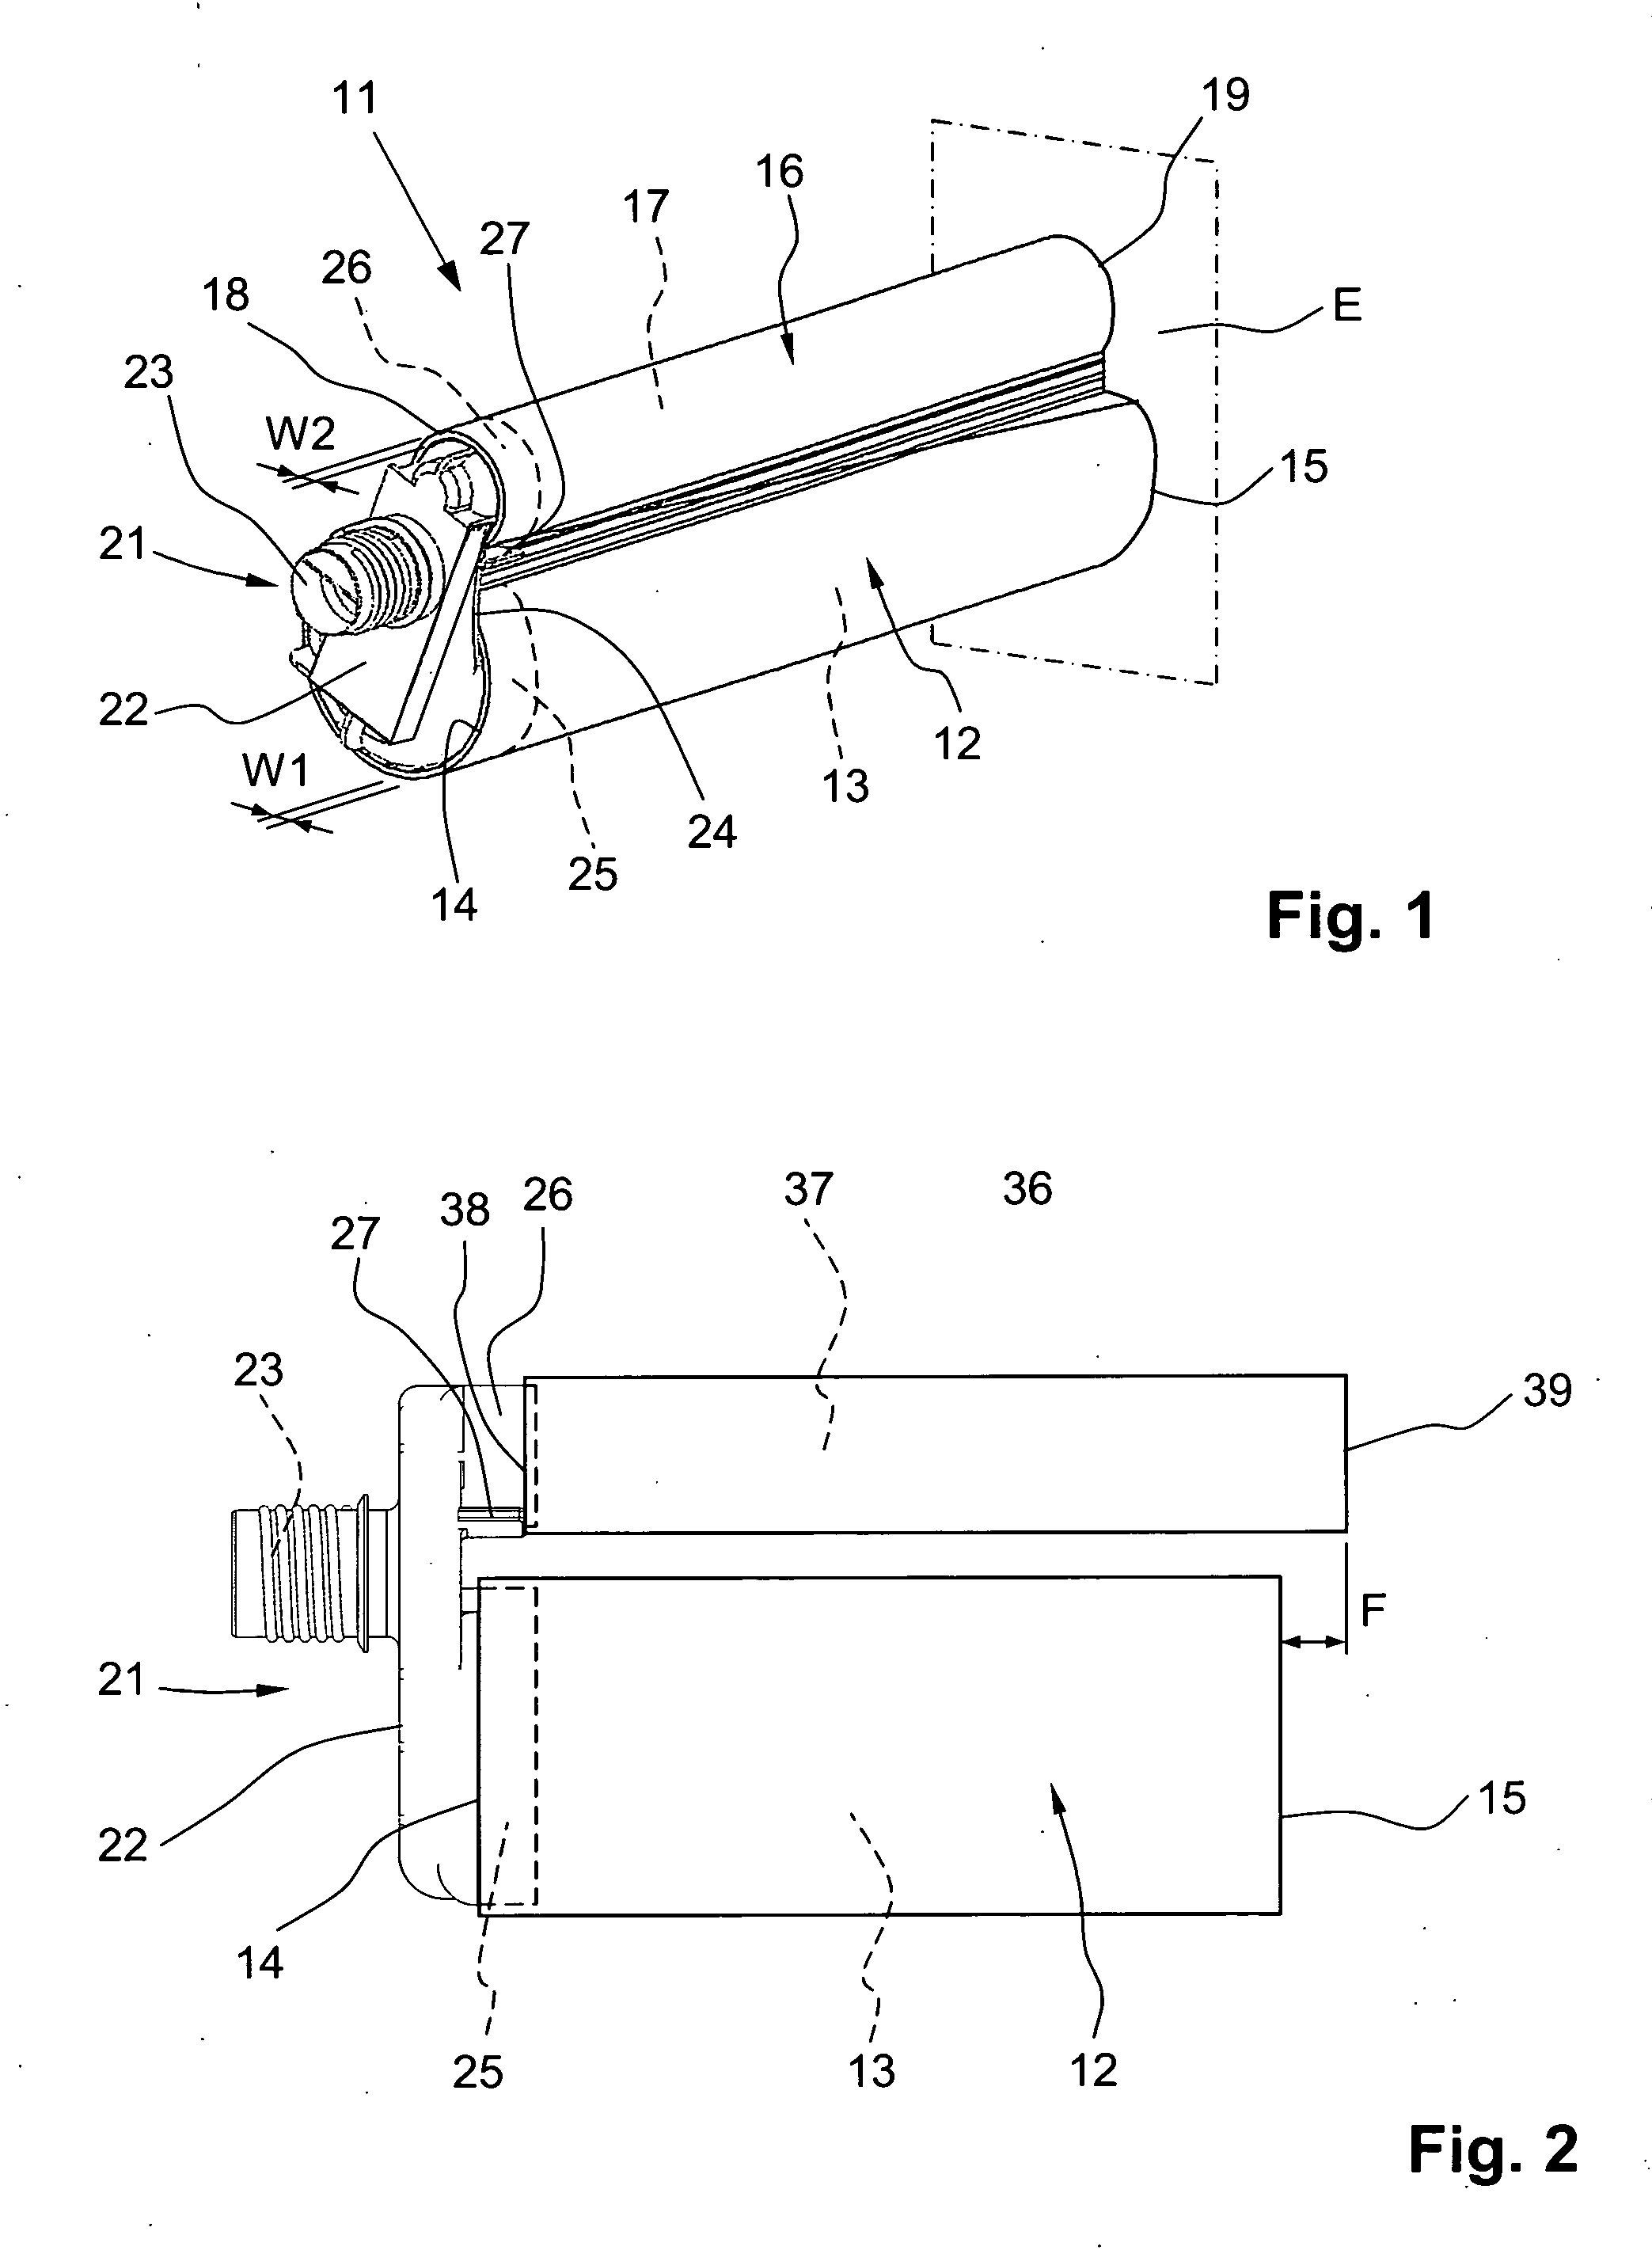 Cartridge for an ejectable compound